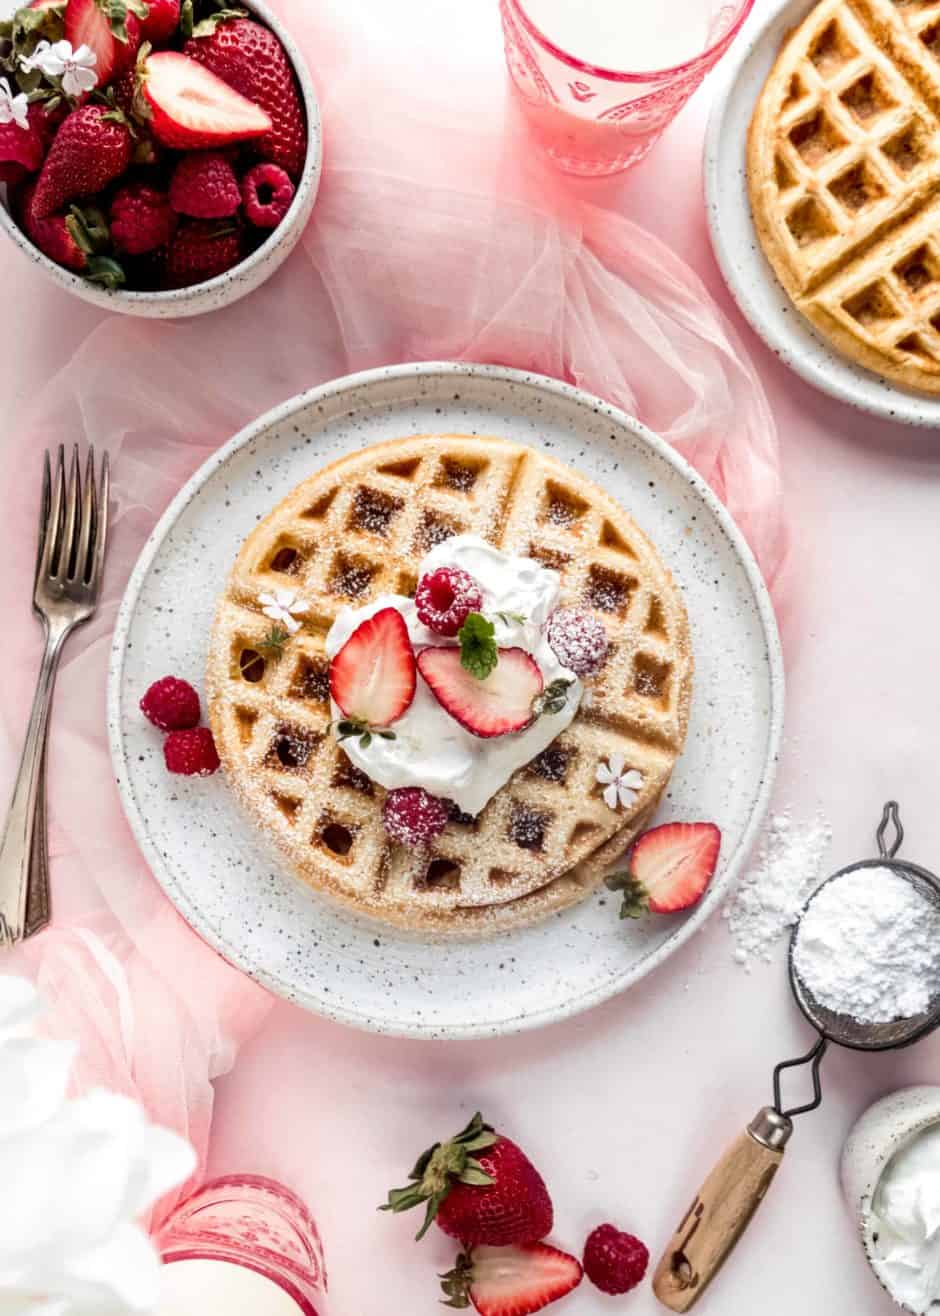 Fulffy yeast Belgian waffle on white plate topped with whipped cream and strawberries. The plate is sitting on a light pink background and surrounded by a bowl of strawberries, powdered sugar in a sifter, and a pink glass of milk